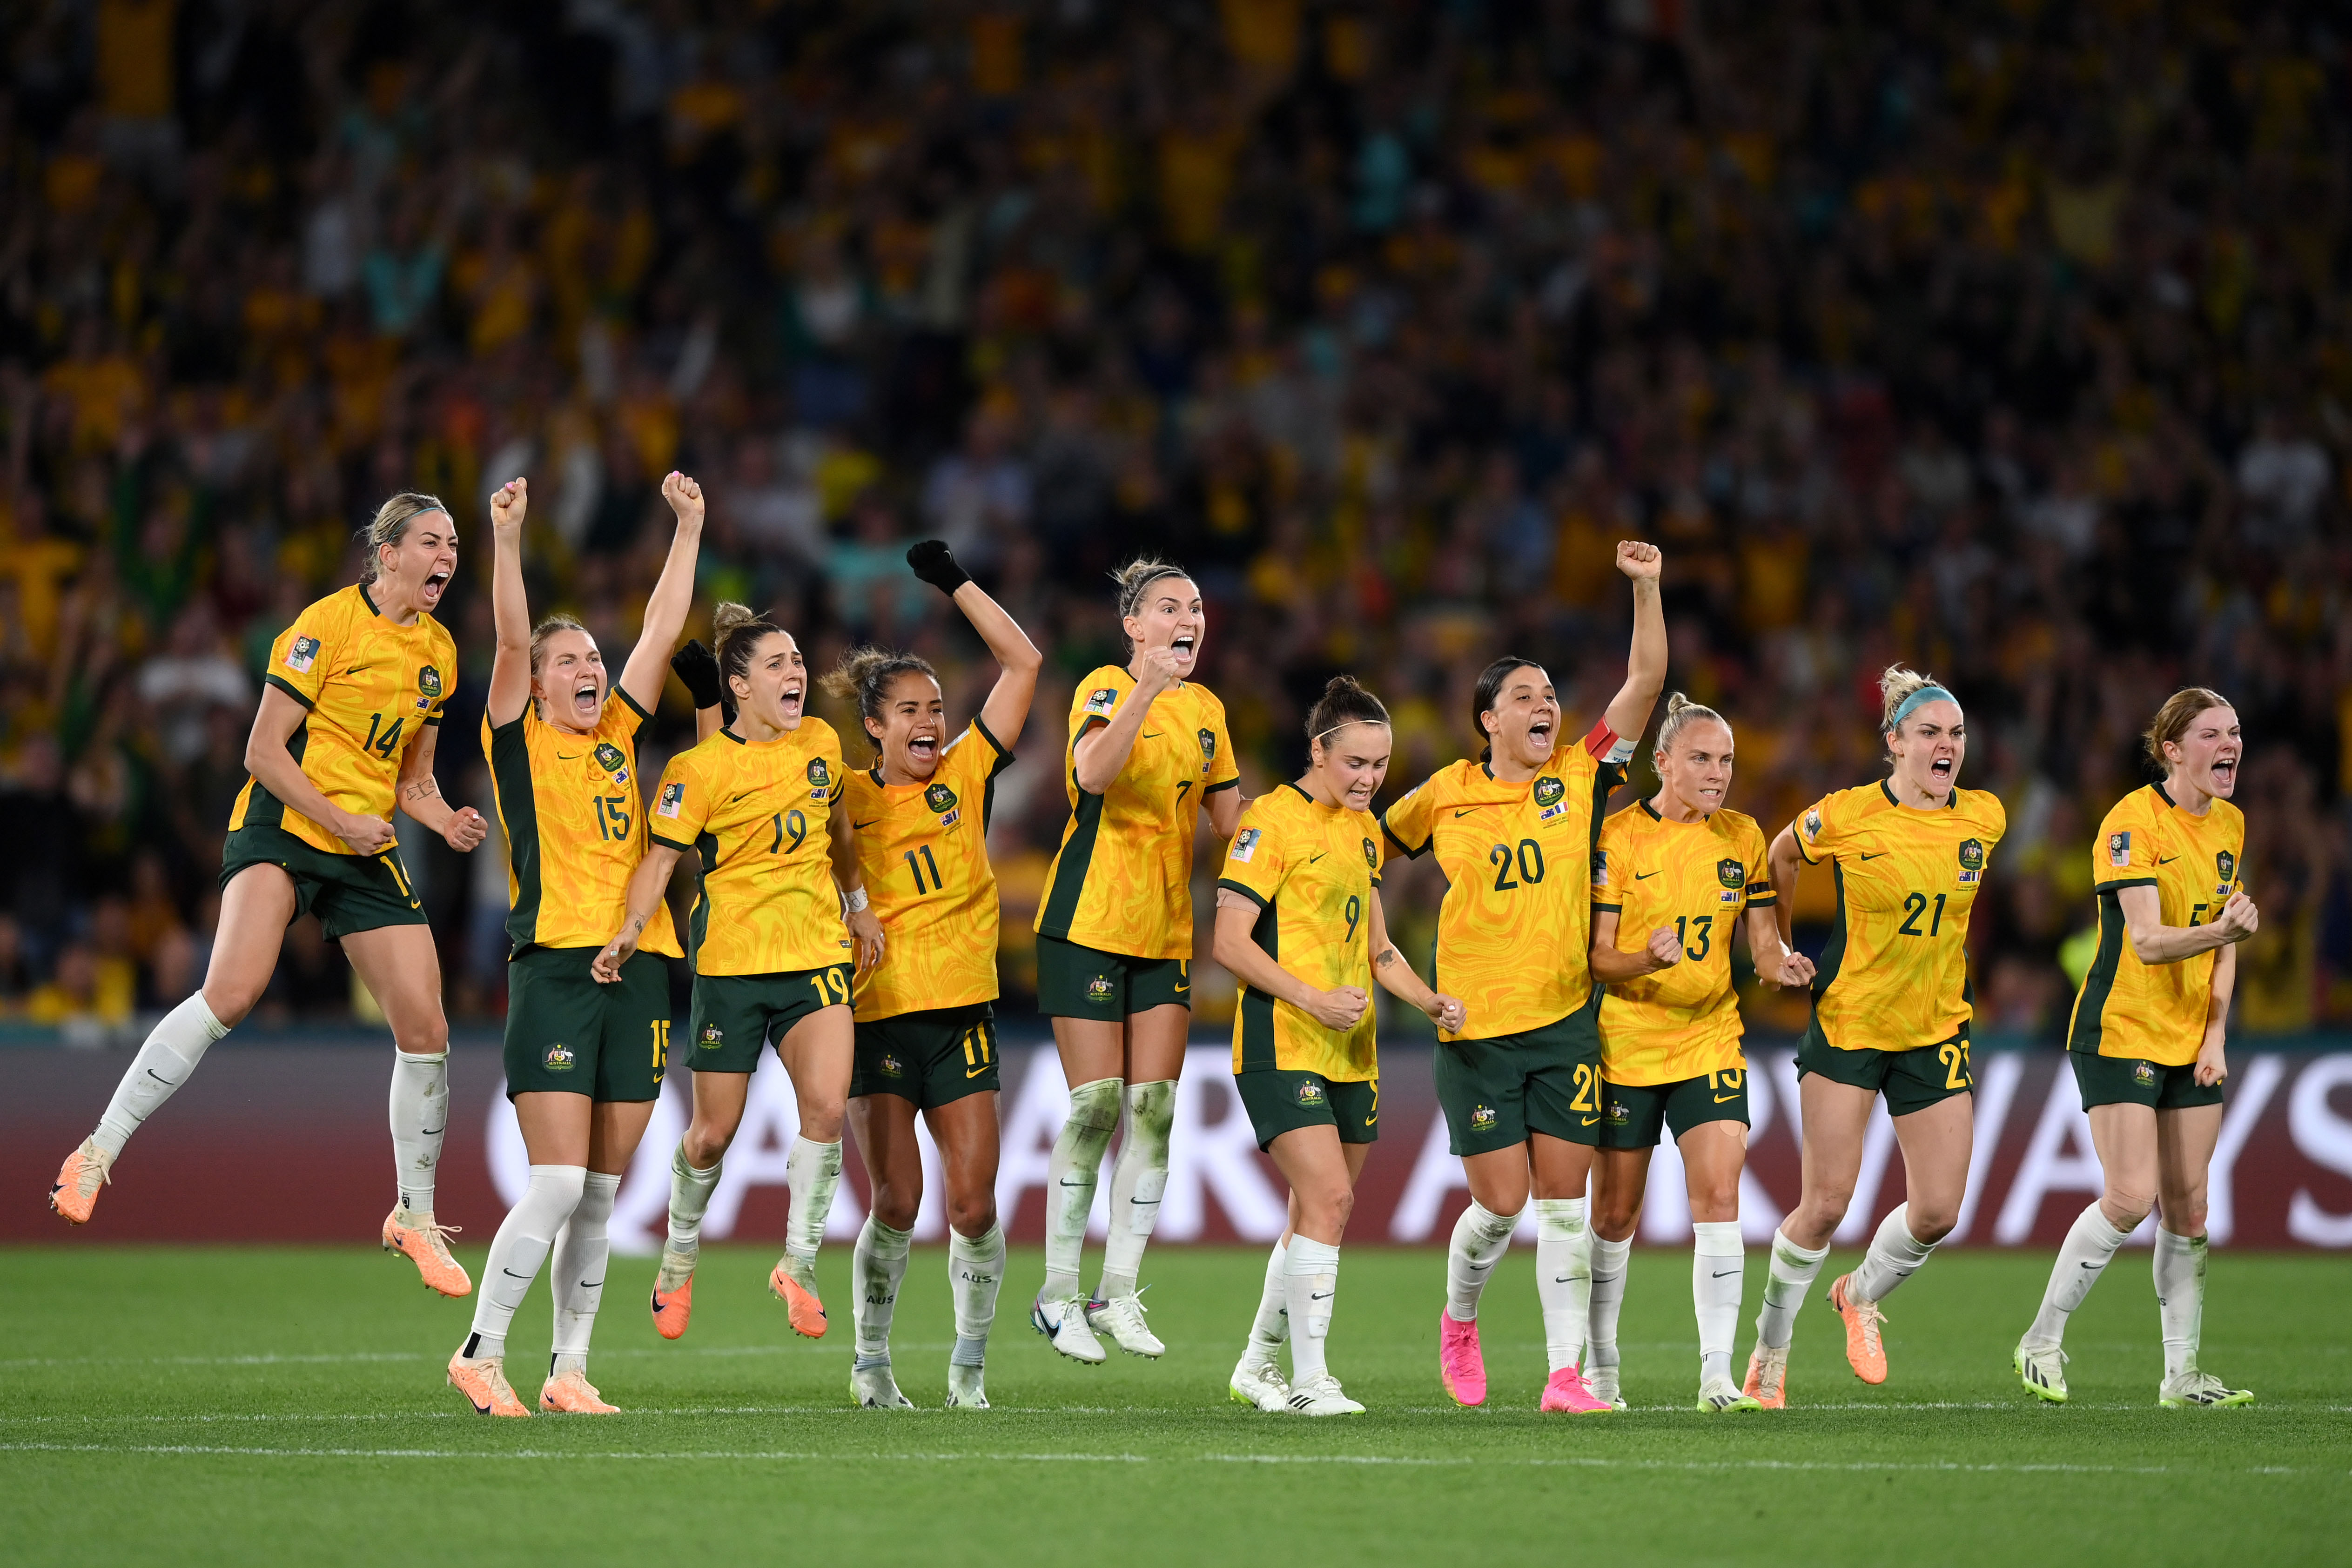 Players of Australia celebrate as Mackenzie Arnold of Australia saves the first penalty of France from Selma Bacha of France in the penalty shoot out during the FIFA Women's World Cup Australia & New Zealand 2023 Quarter Final match between Australia and France at Brisbane Stadium on August 12, 2023 in Brisbane / Meaanjin, Australia. (Photo by Justin Setterfield/Getty Images)